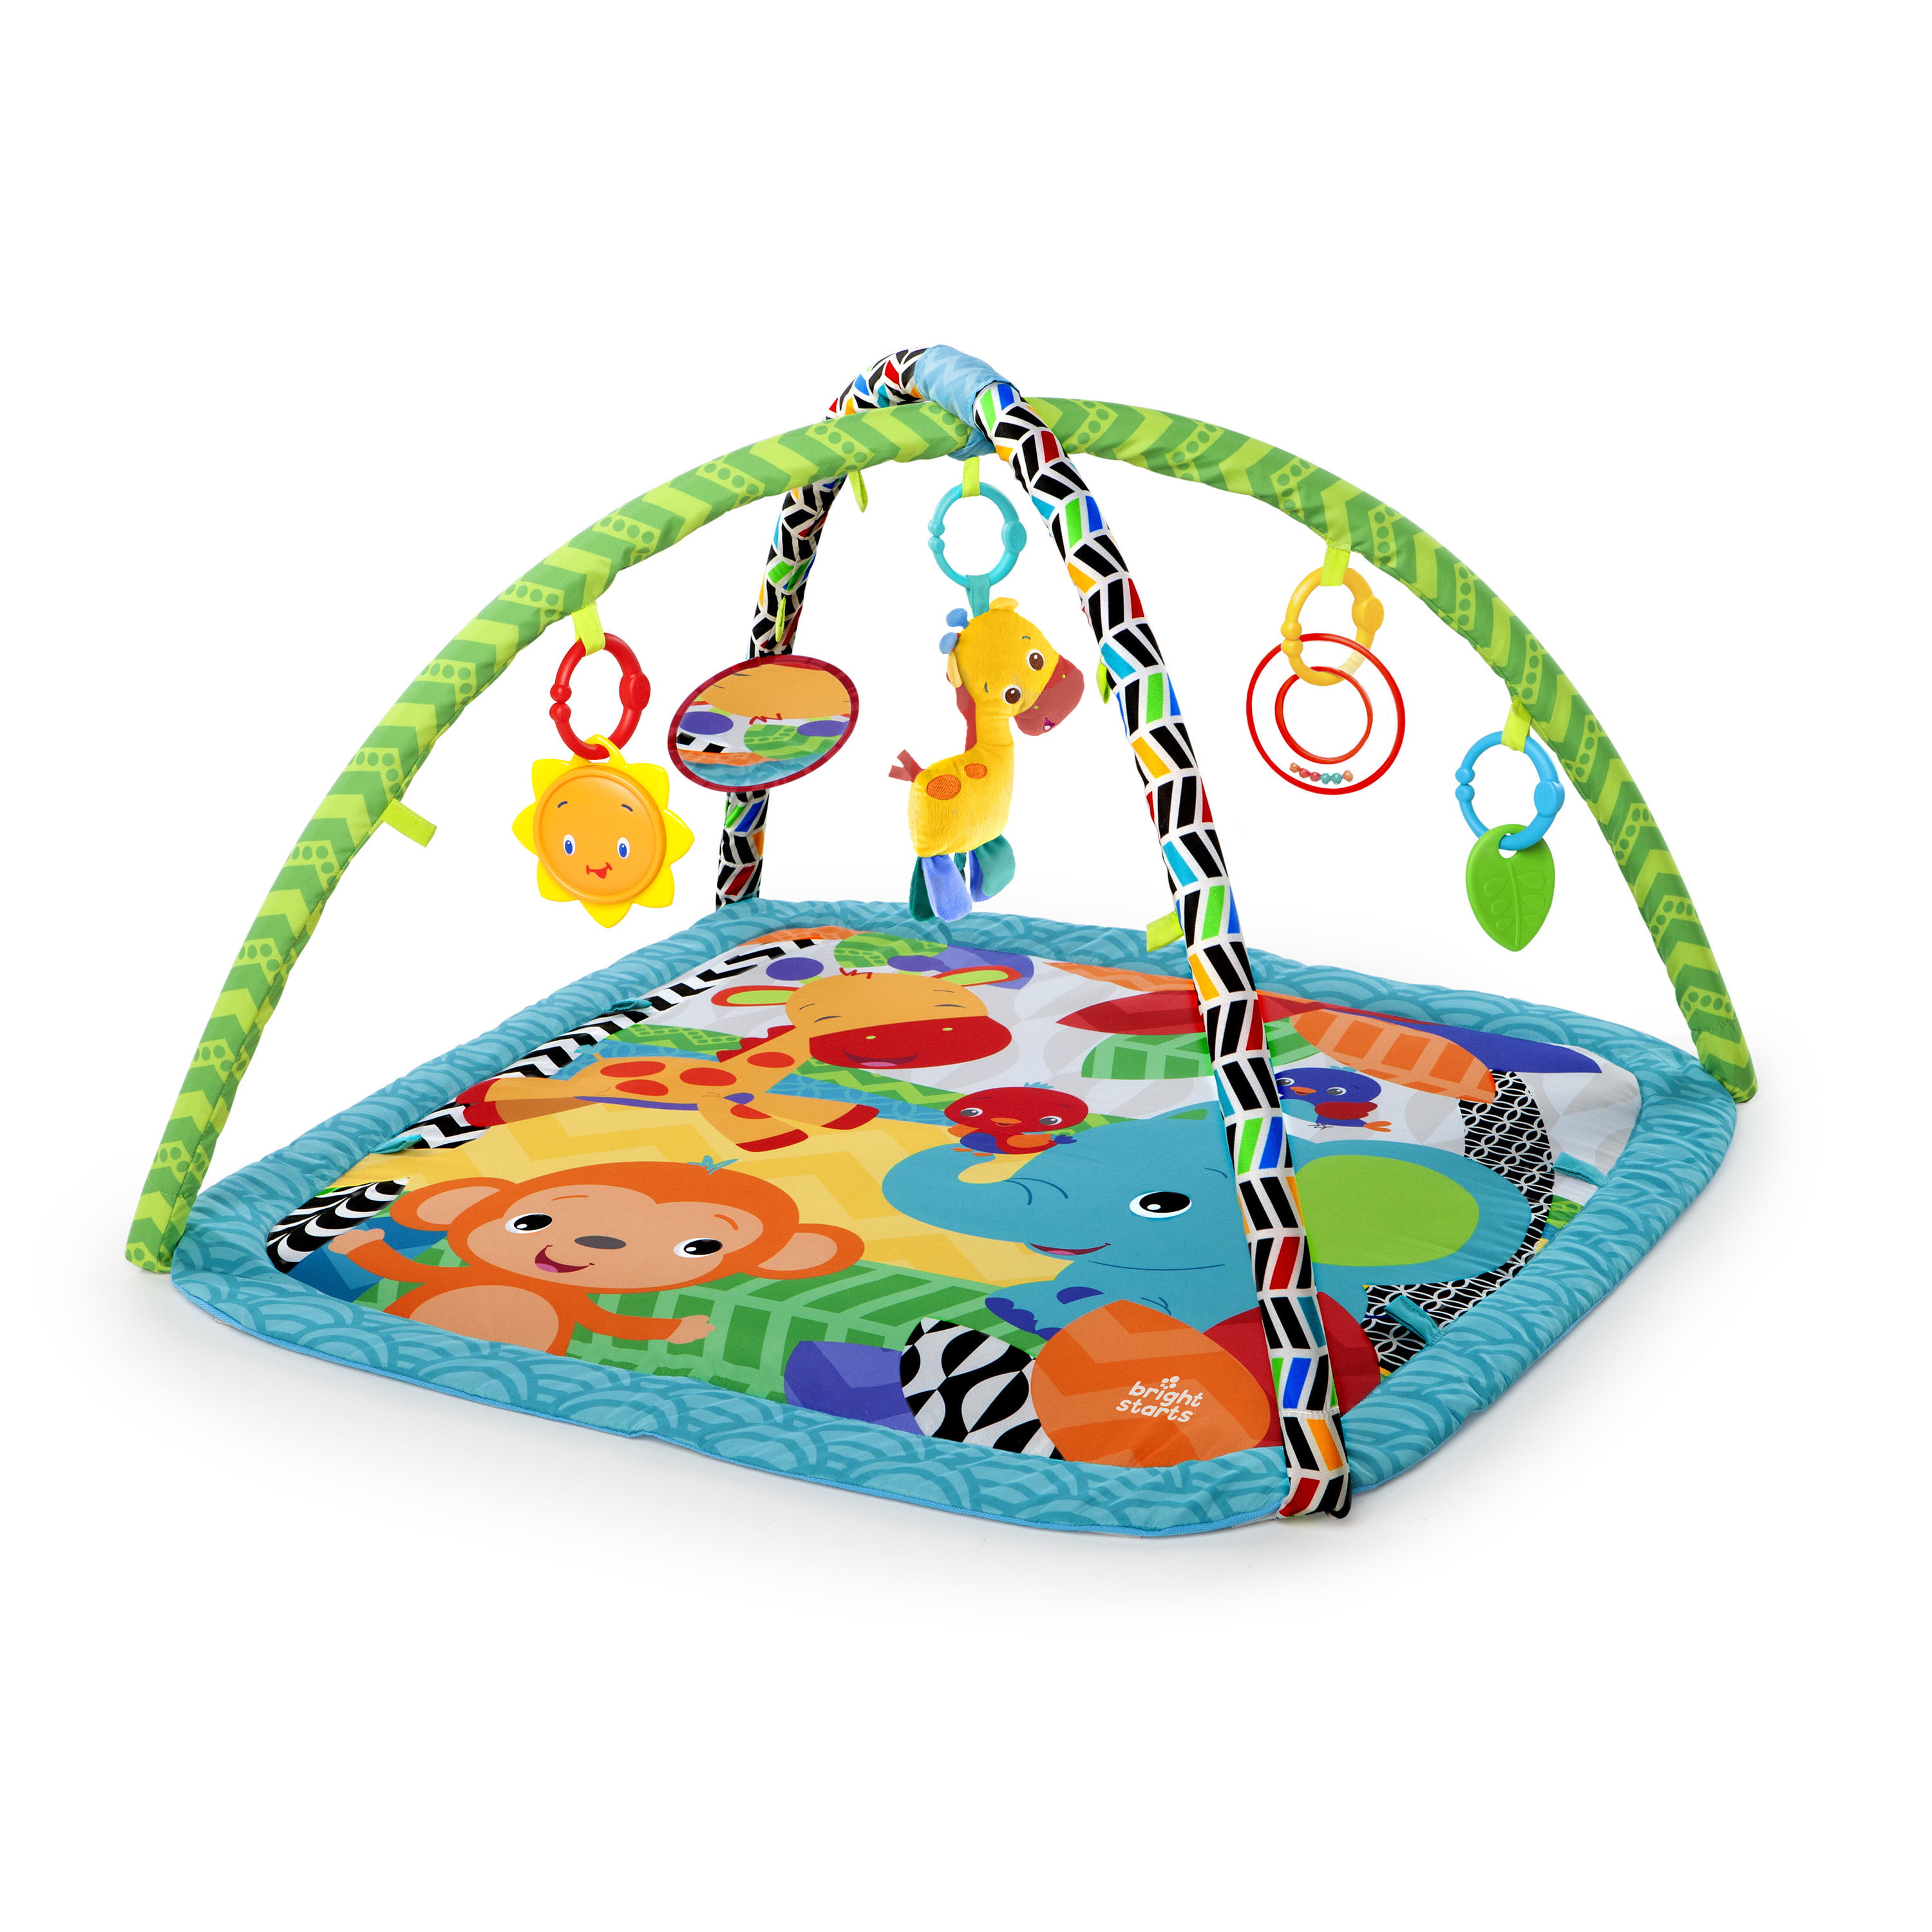 Zippy Zoo Baby Activity Gym with Toys